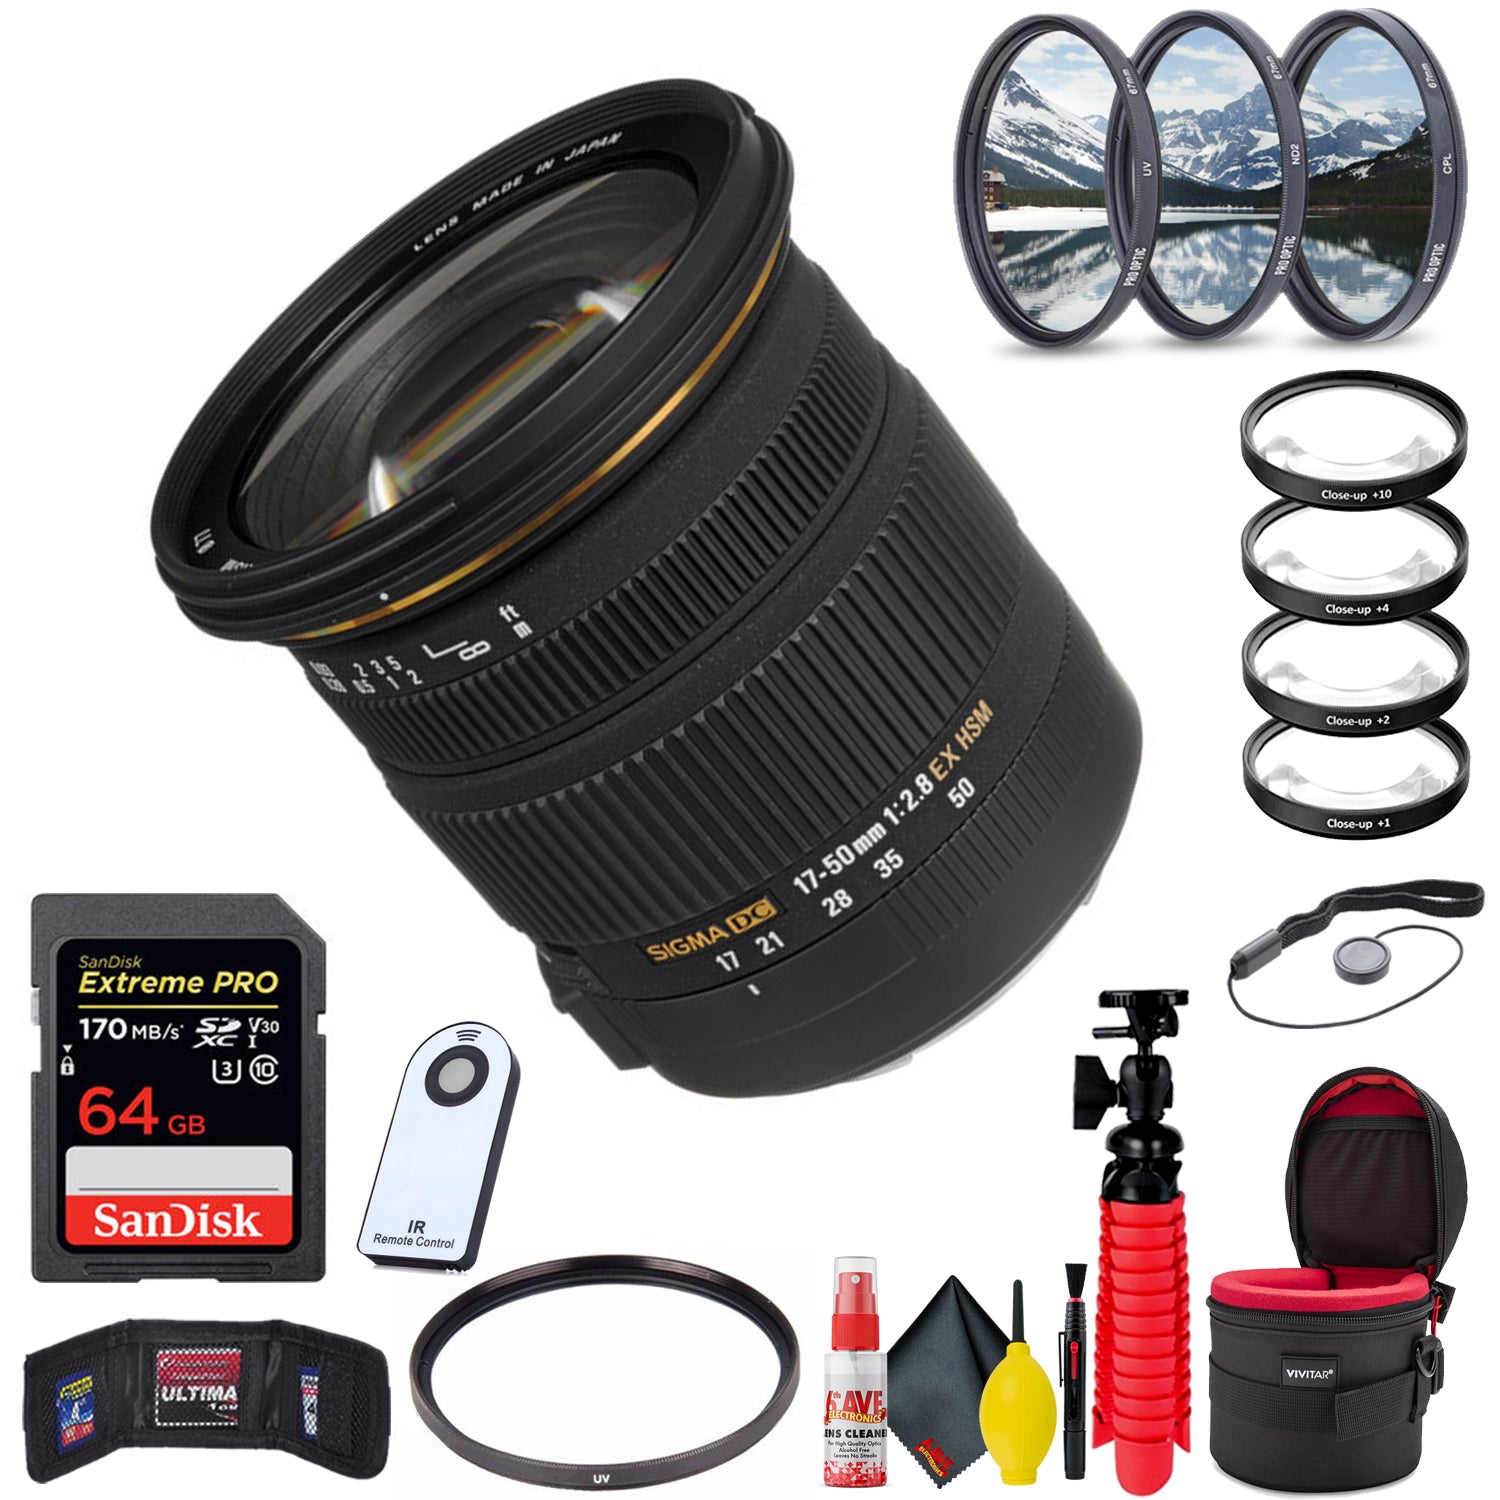 Sigma 17-50mm f/2.8 EX DC OS HSM Lens for Canon EF + Accessories